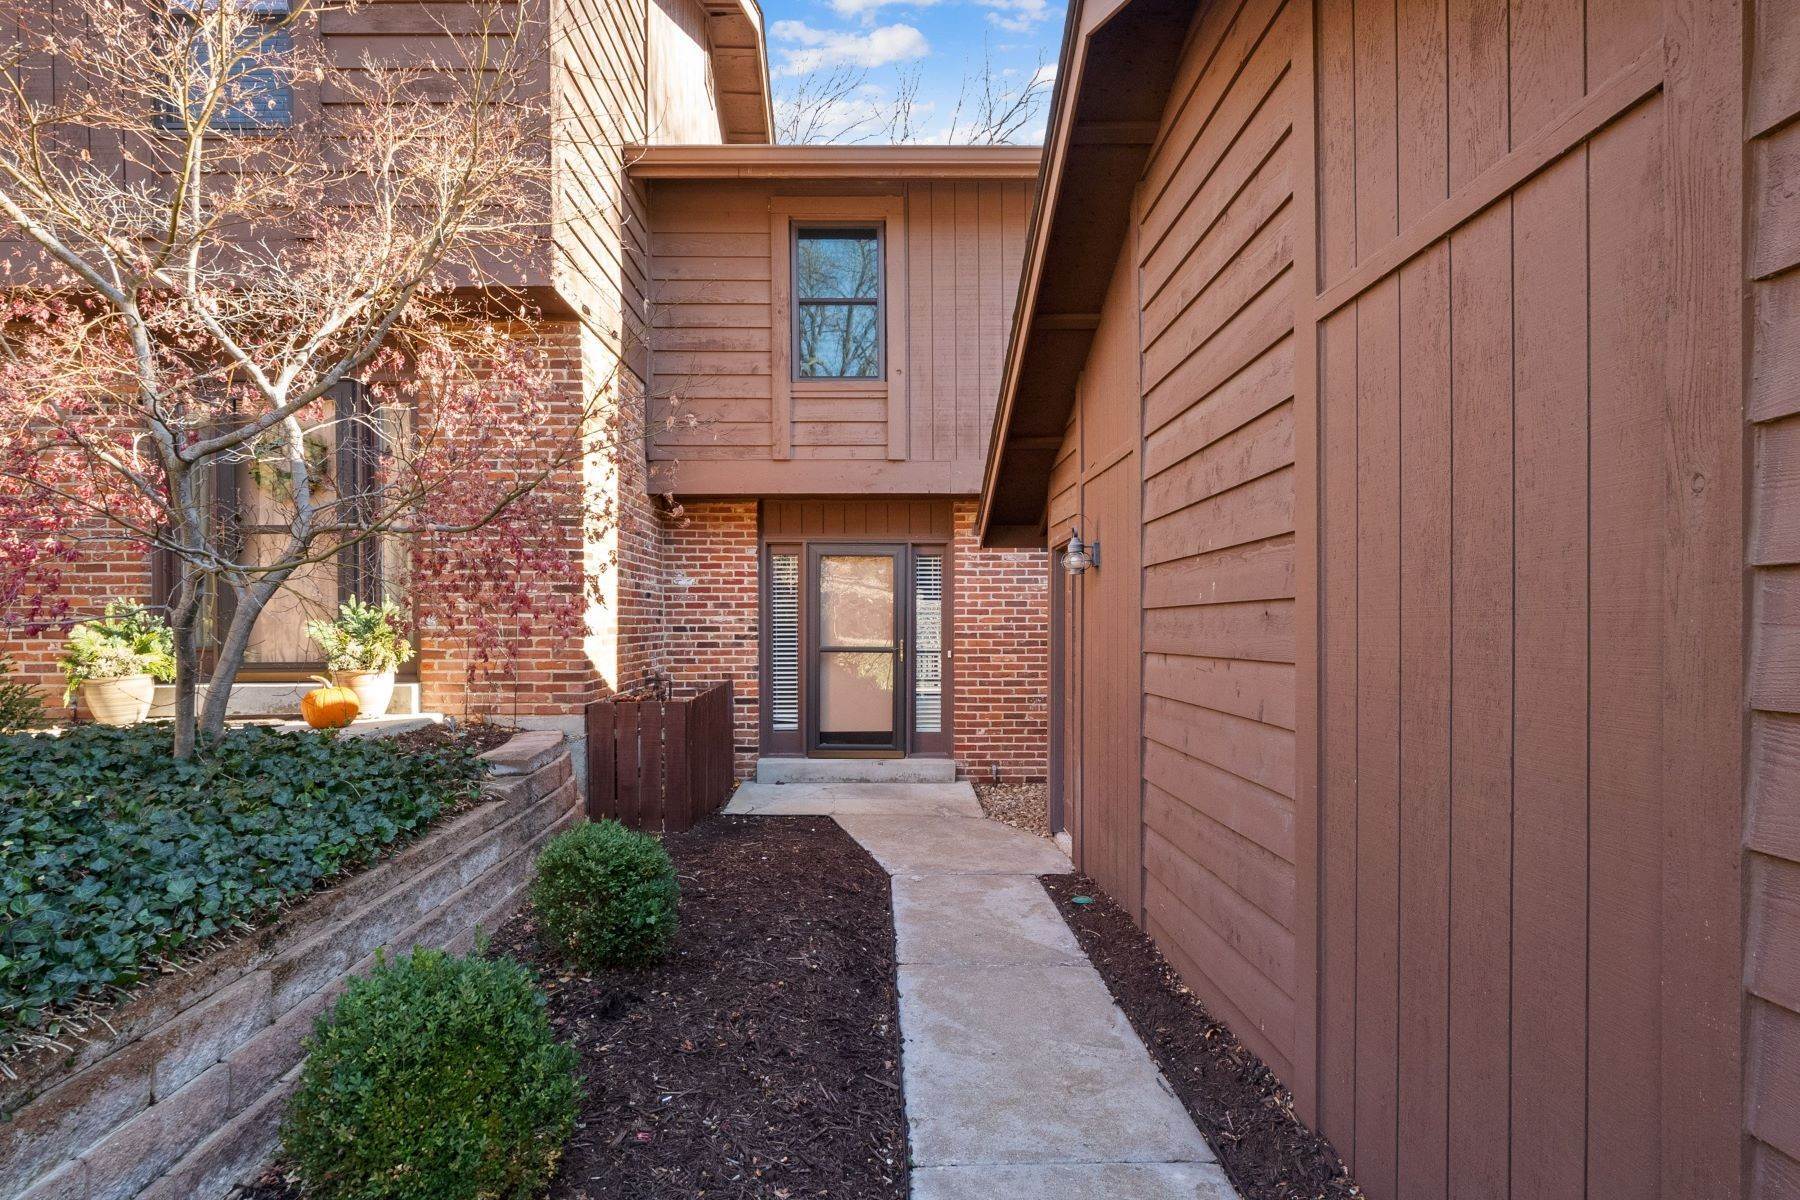 Condominiums for Sale at Beautifully Renovated Condo in Briar Hill Farm 690 Trailcrest Court Kirkwood, Missouri 63122 United States